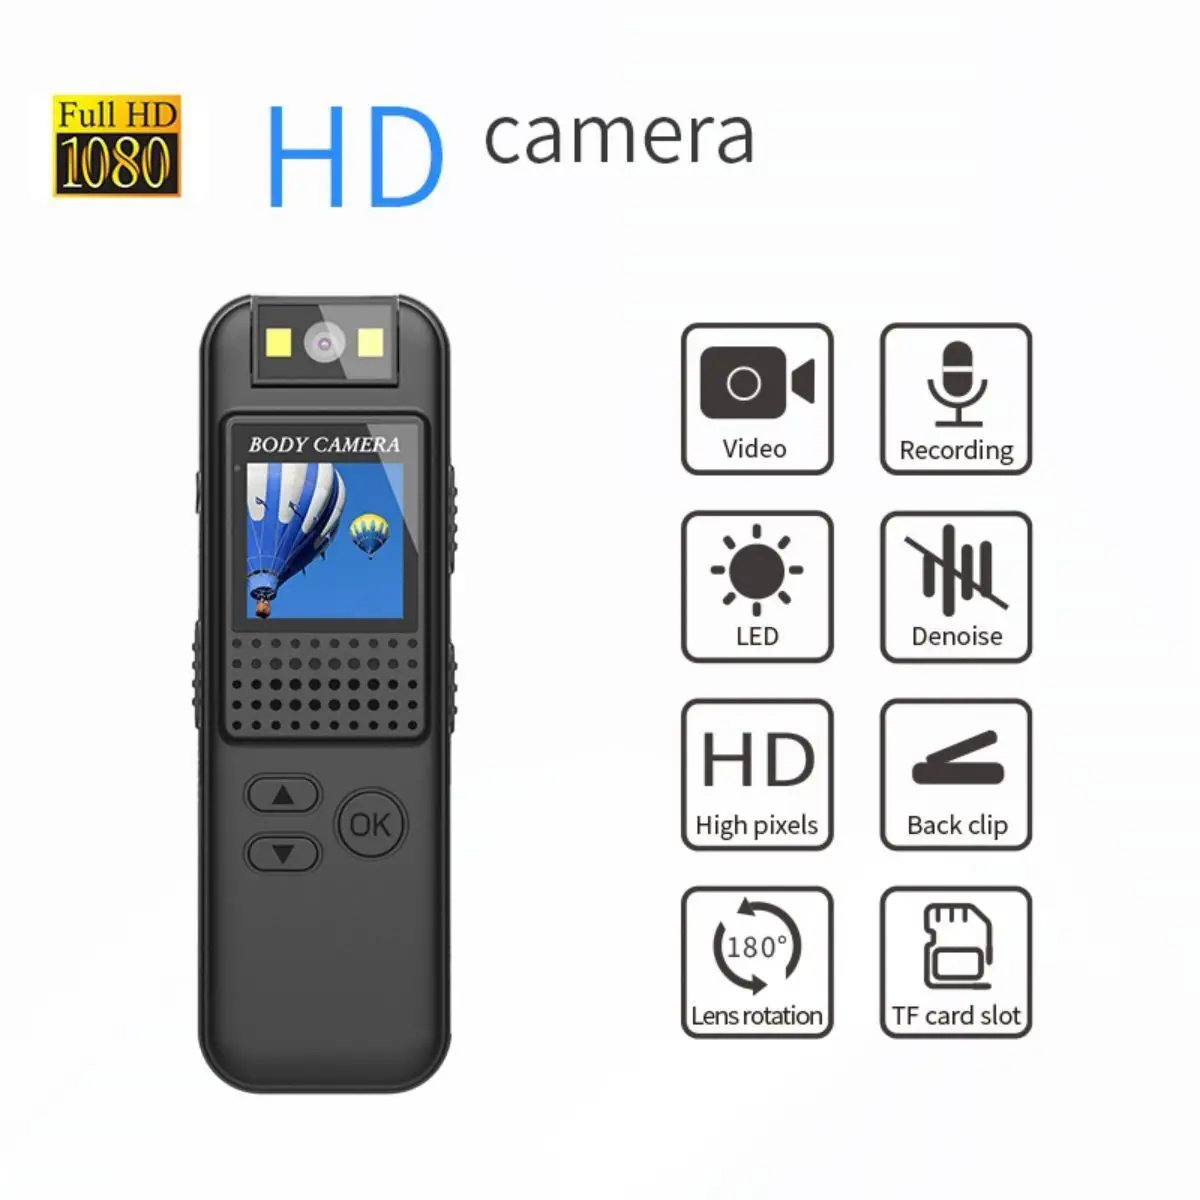 D010 Body Camera 1080P HD Portable with Back Clip - Hugmie